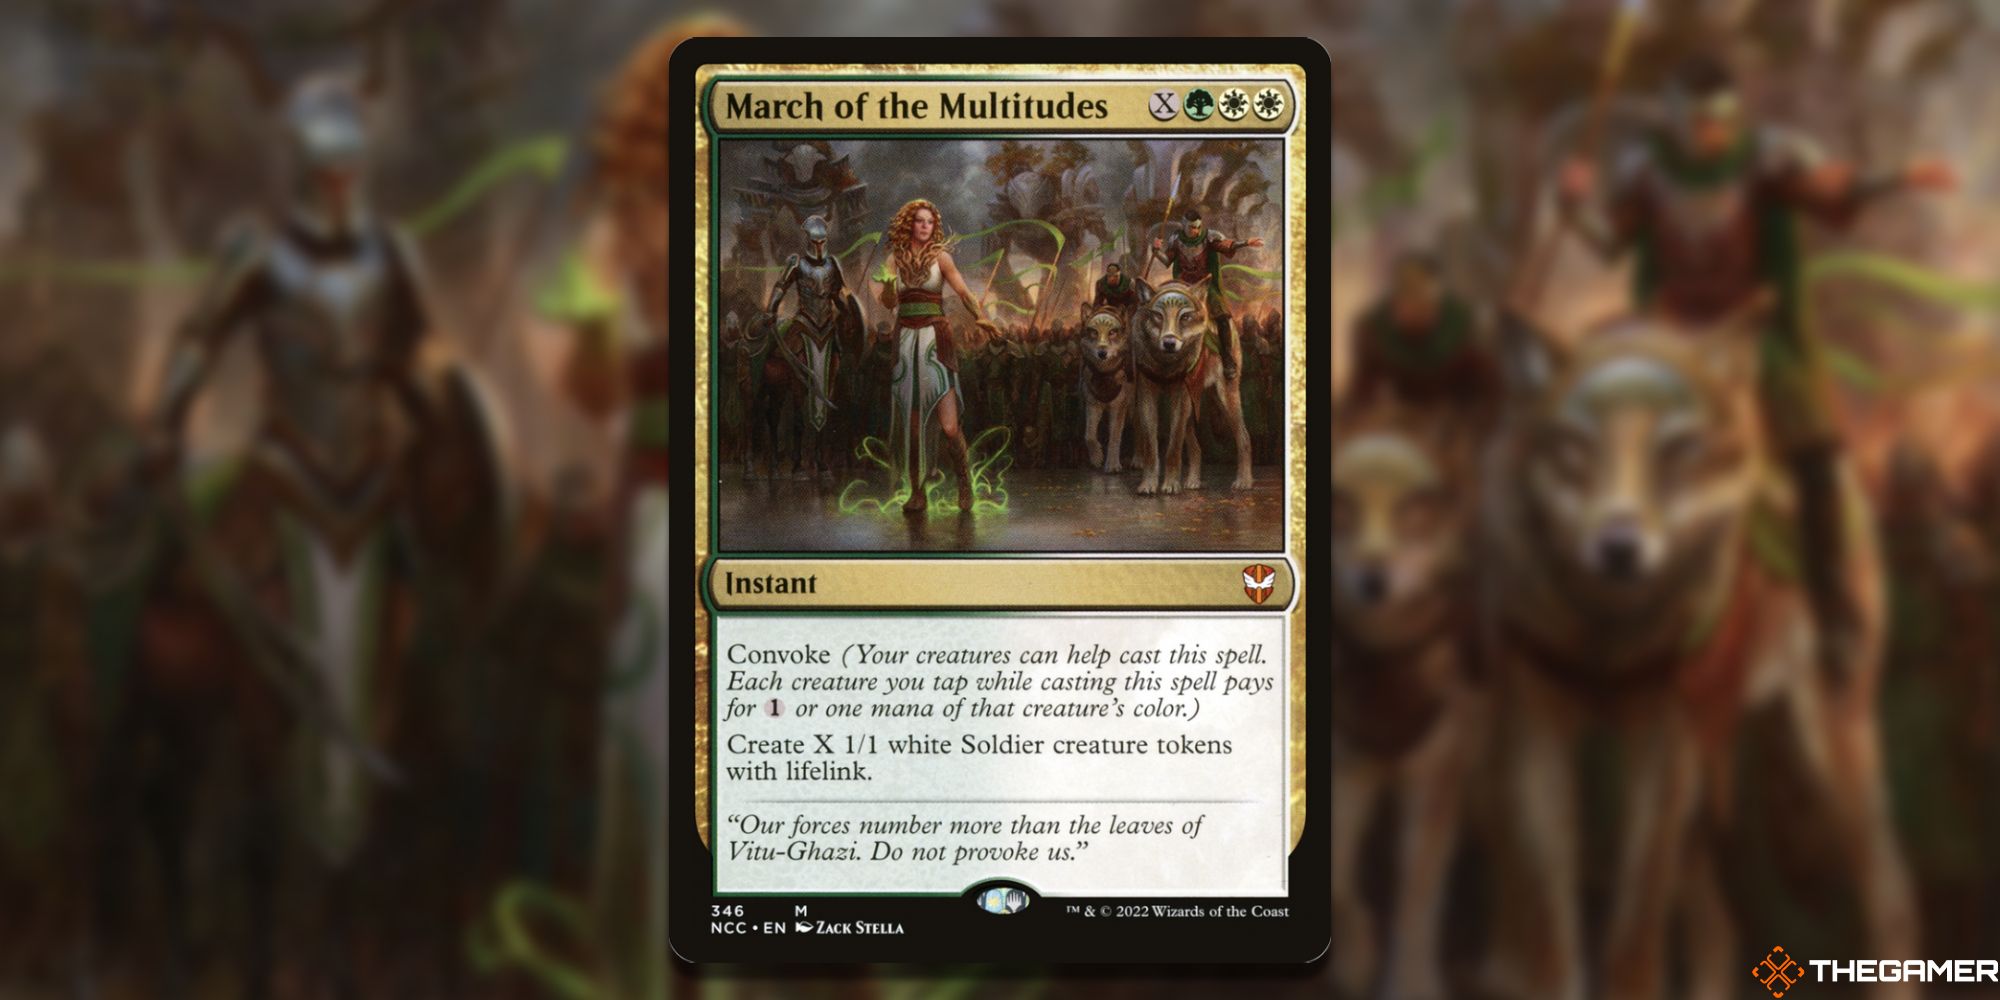 Image of the March of the Multitudes card in Magic: The Gathering, with art by Zack Stella